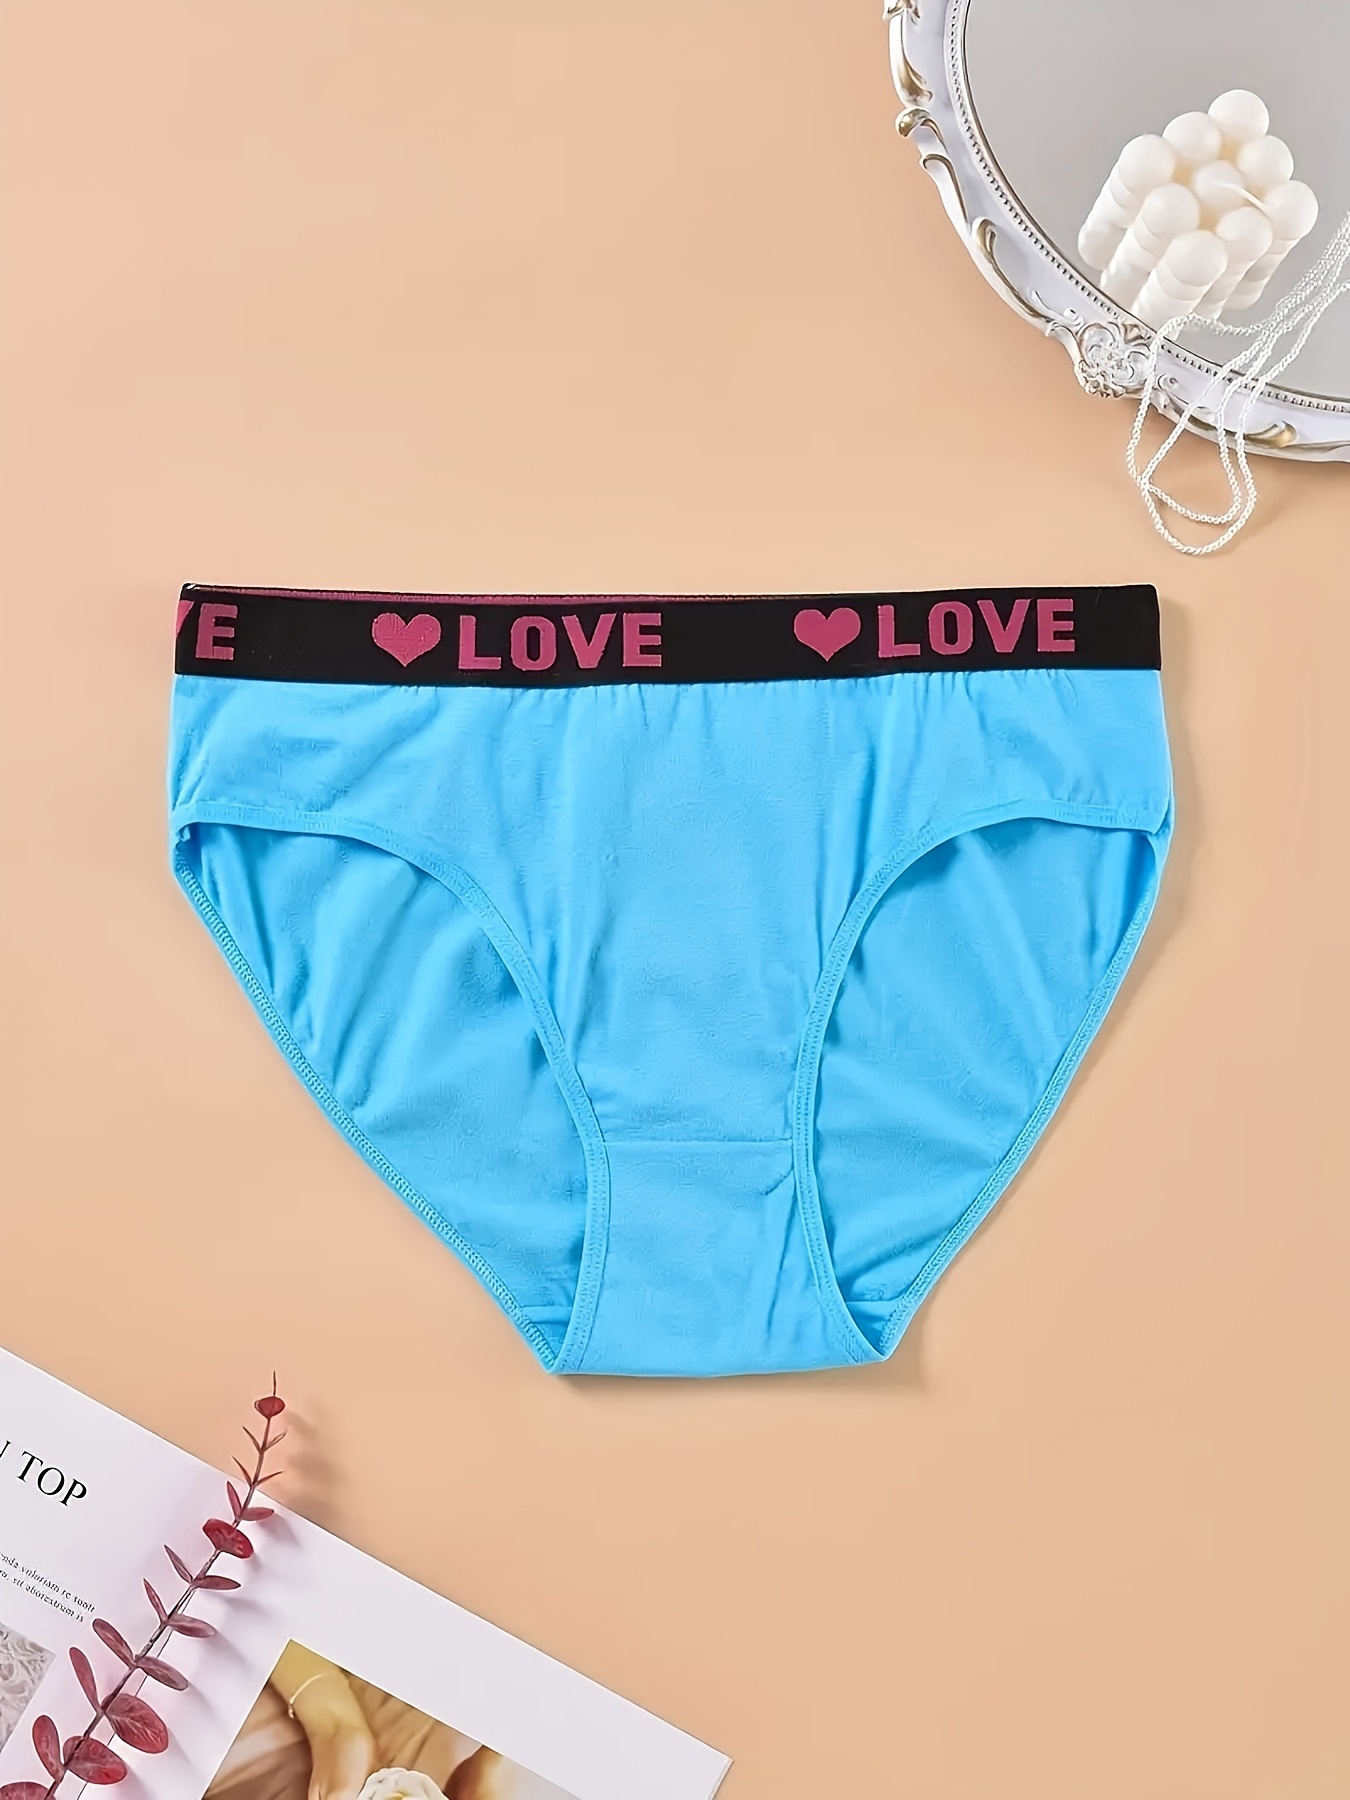 Personalize Your Own Plus Size Mini Hearts Cotton Full Brief Panties FAST  SHIPPING Valentines Panties, Plus Sizes X, 1X, 2X, 3X, 4X, 5X -   Australia